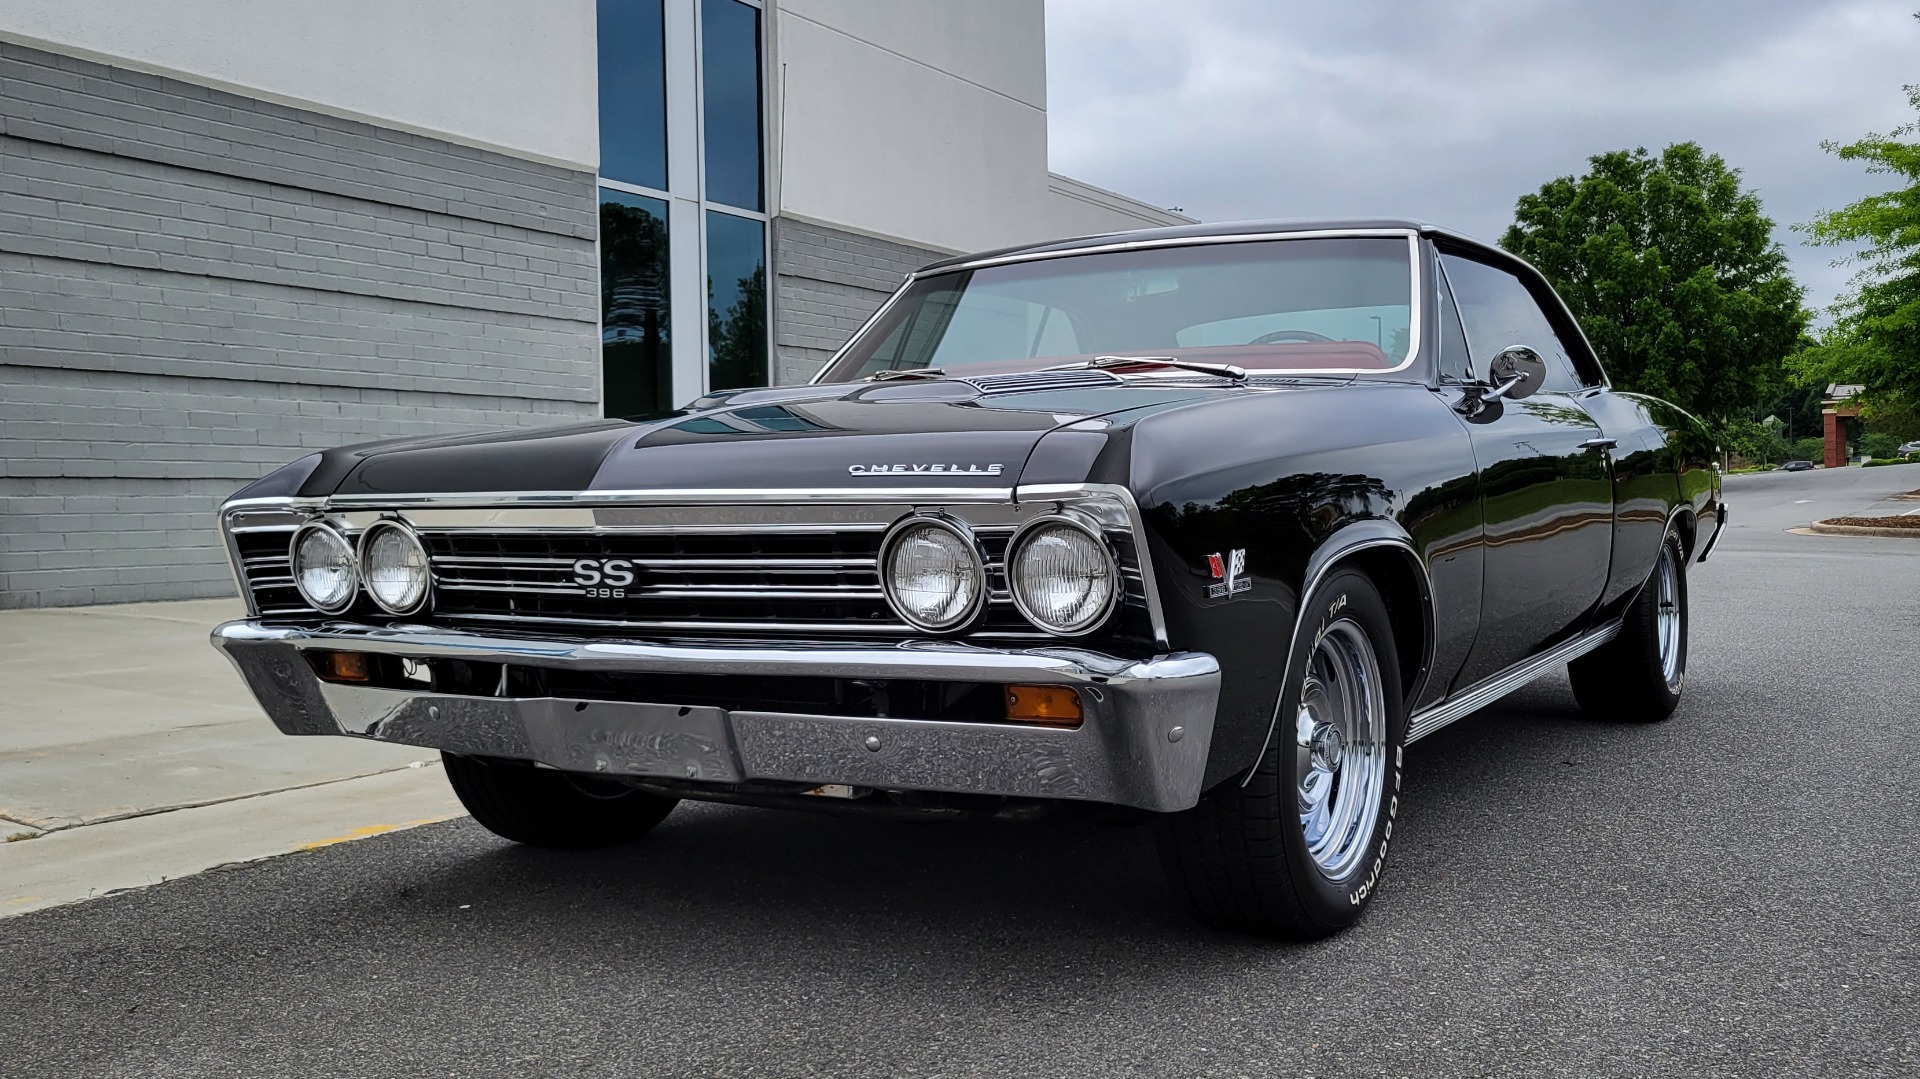 Used 1967 Chevrolet CHEVELLE SS 396 / HARD-TOP / 4-SPD / ICE COLD AIR / PWR STRNG / RESTORED for sale $59,999 at Formula Imports in Charlotte NC 28227 4